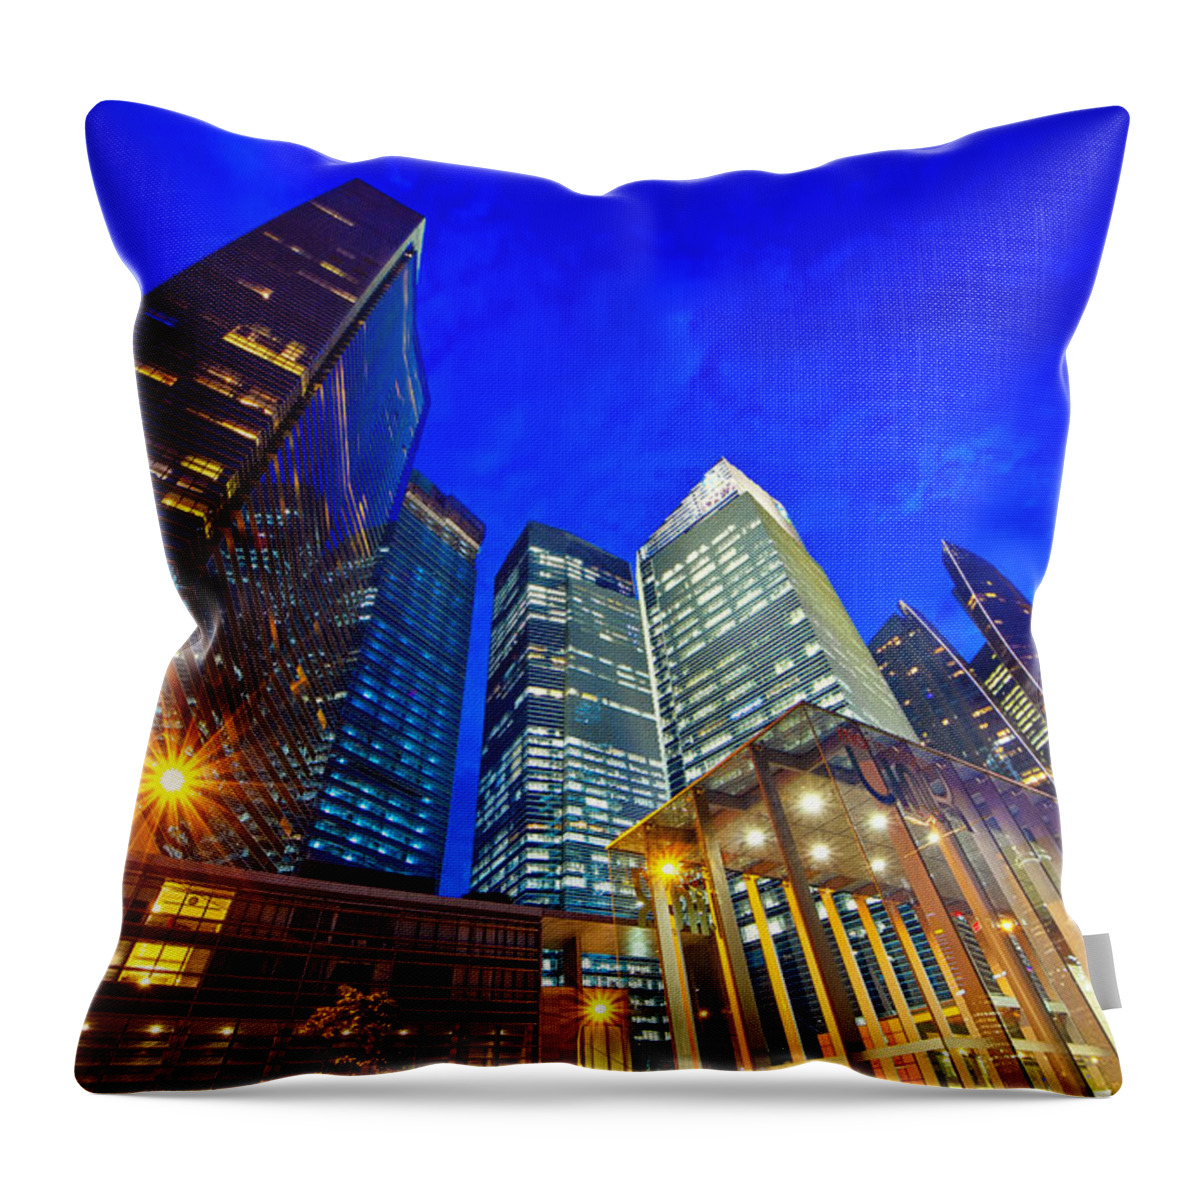 Tranquility Throw Pillow featuring the photograph Marina Bay Link by Feel Free To Share Your Thoughts On My Works